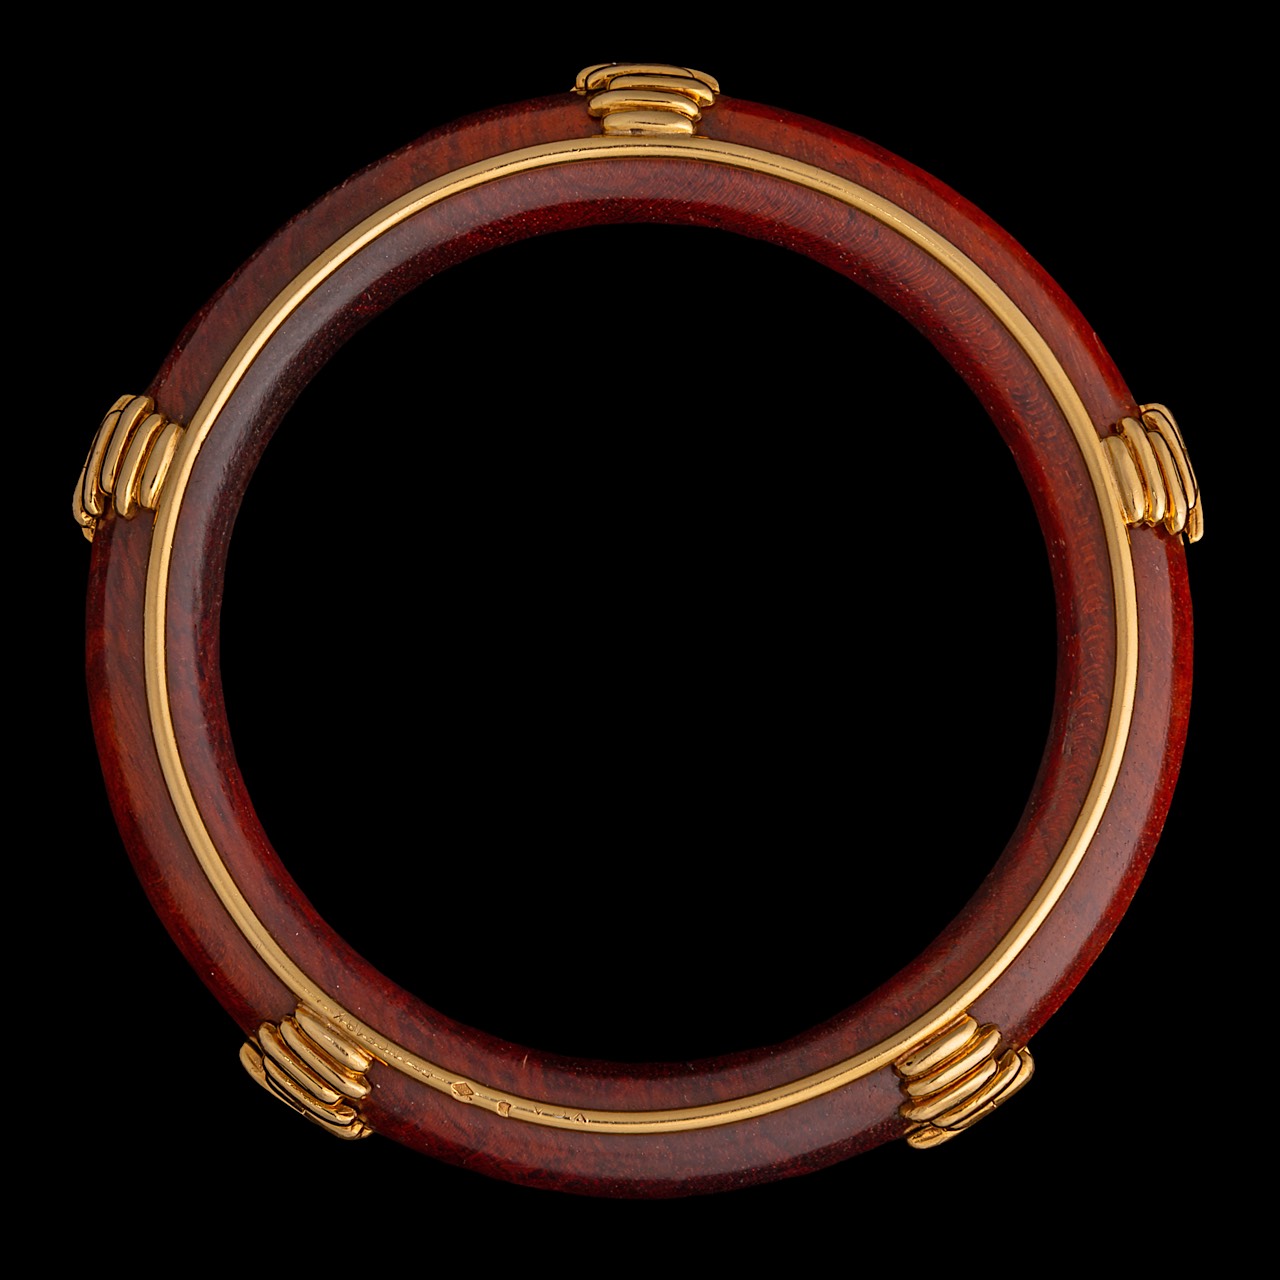 Van Cleef & Arpels, a wood and gold bangle bracelet, 18ct gold, signed VCA, Inner circumference 20 c - Image 3 of 7